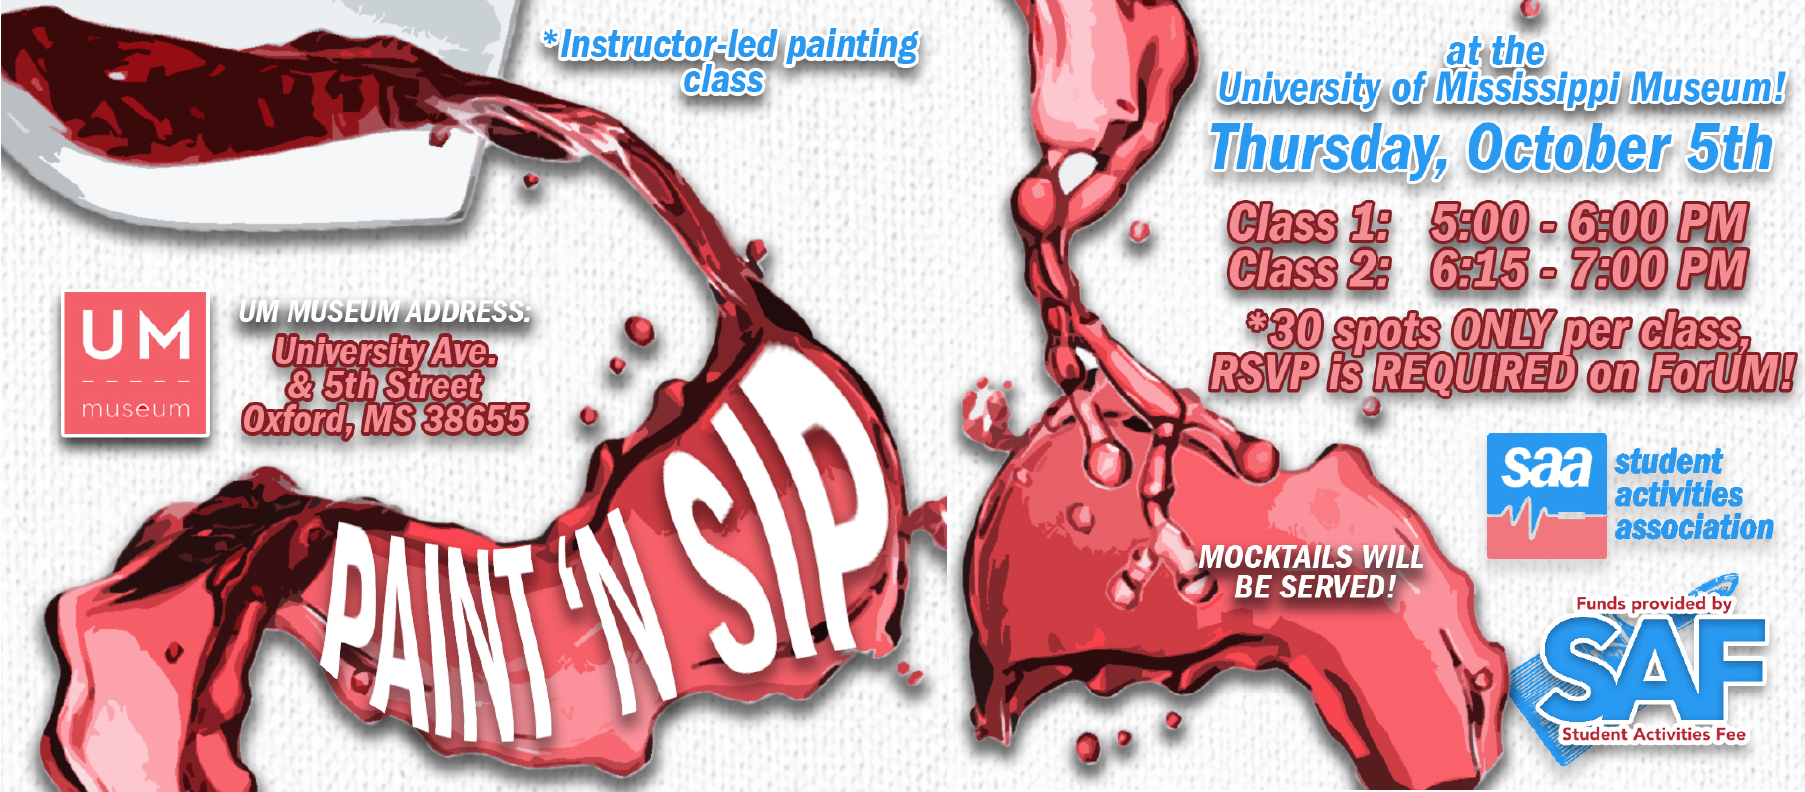 SAA Paint and Sip, Thursday October 5th at the UM Museum